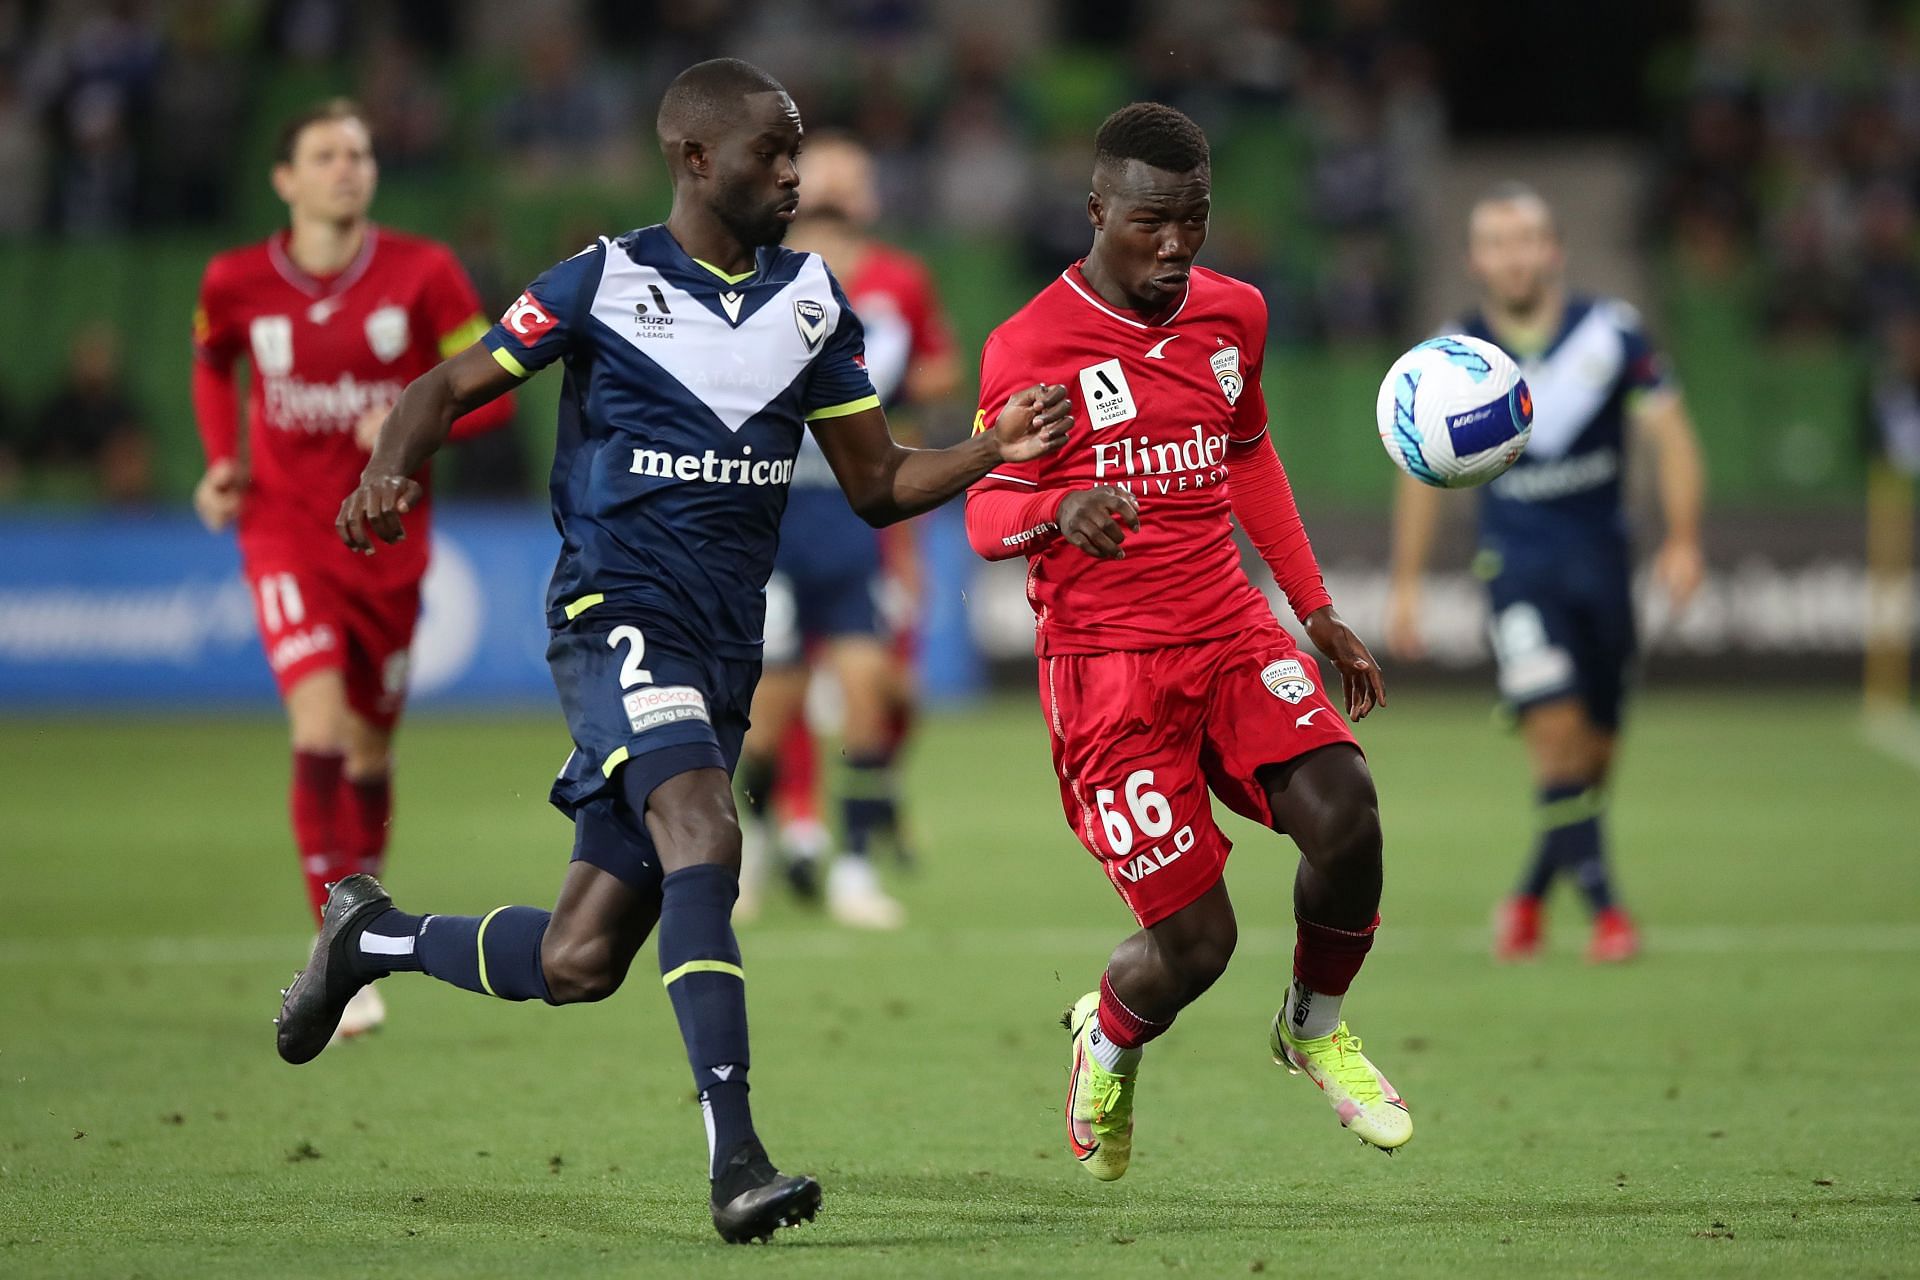 Adelaide United take on Melbourne Victory this weekend